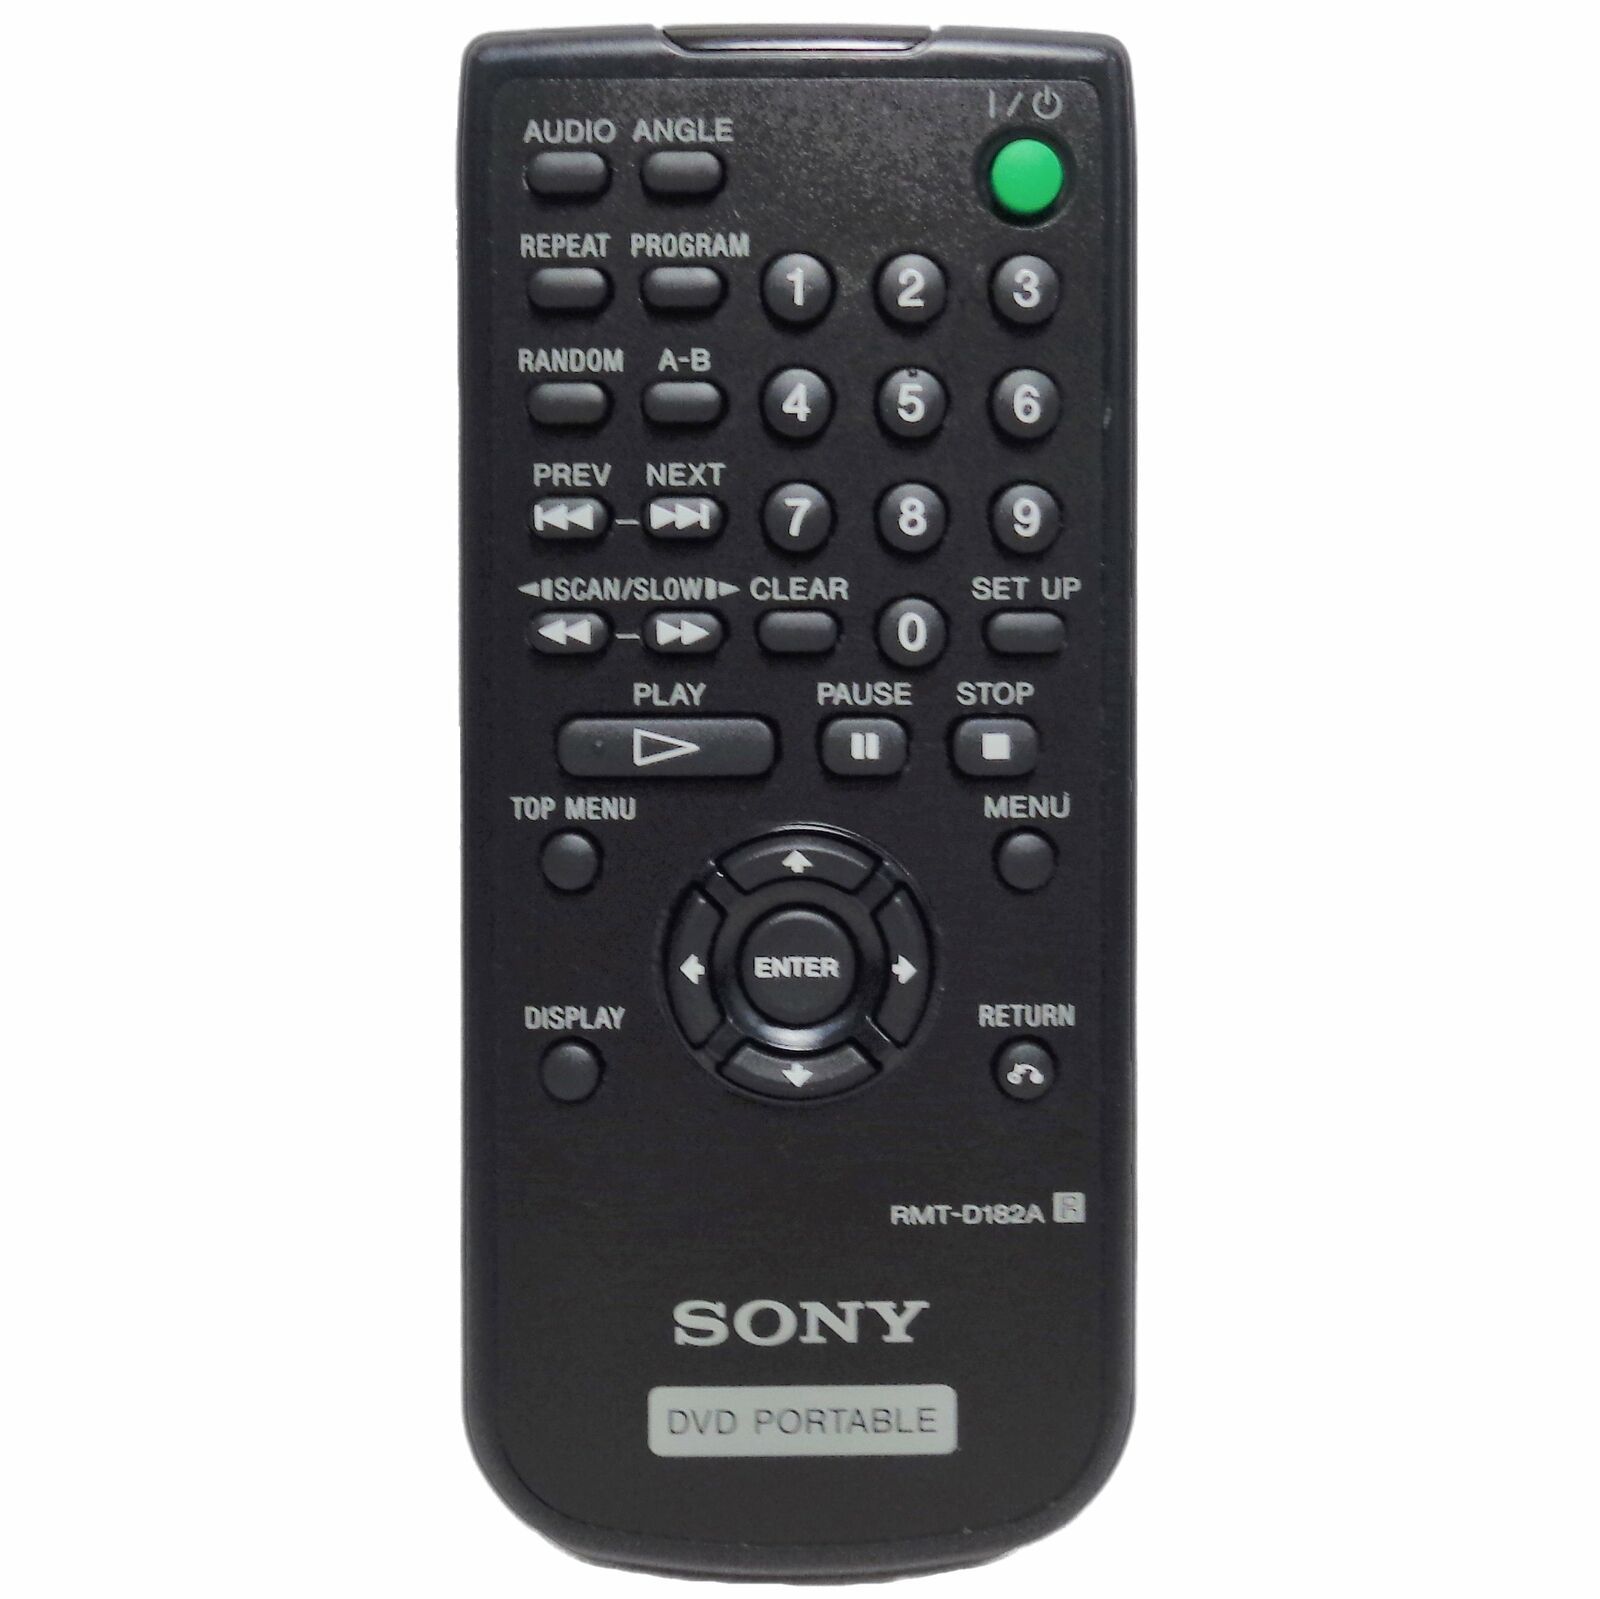 Primary image for Sony RMT-D182A Factory Original DVD Player Remote DVPFX815, BDPS570, DVPFX935